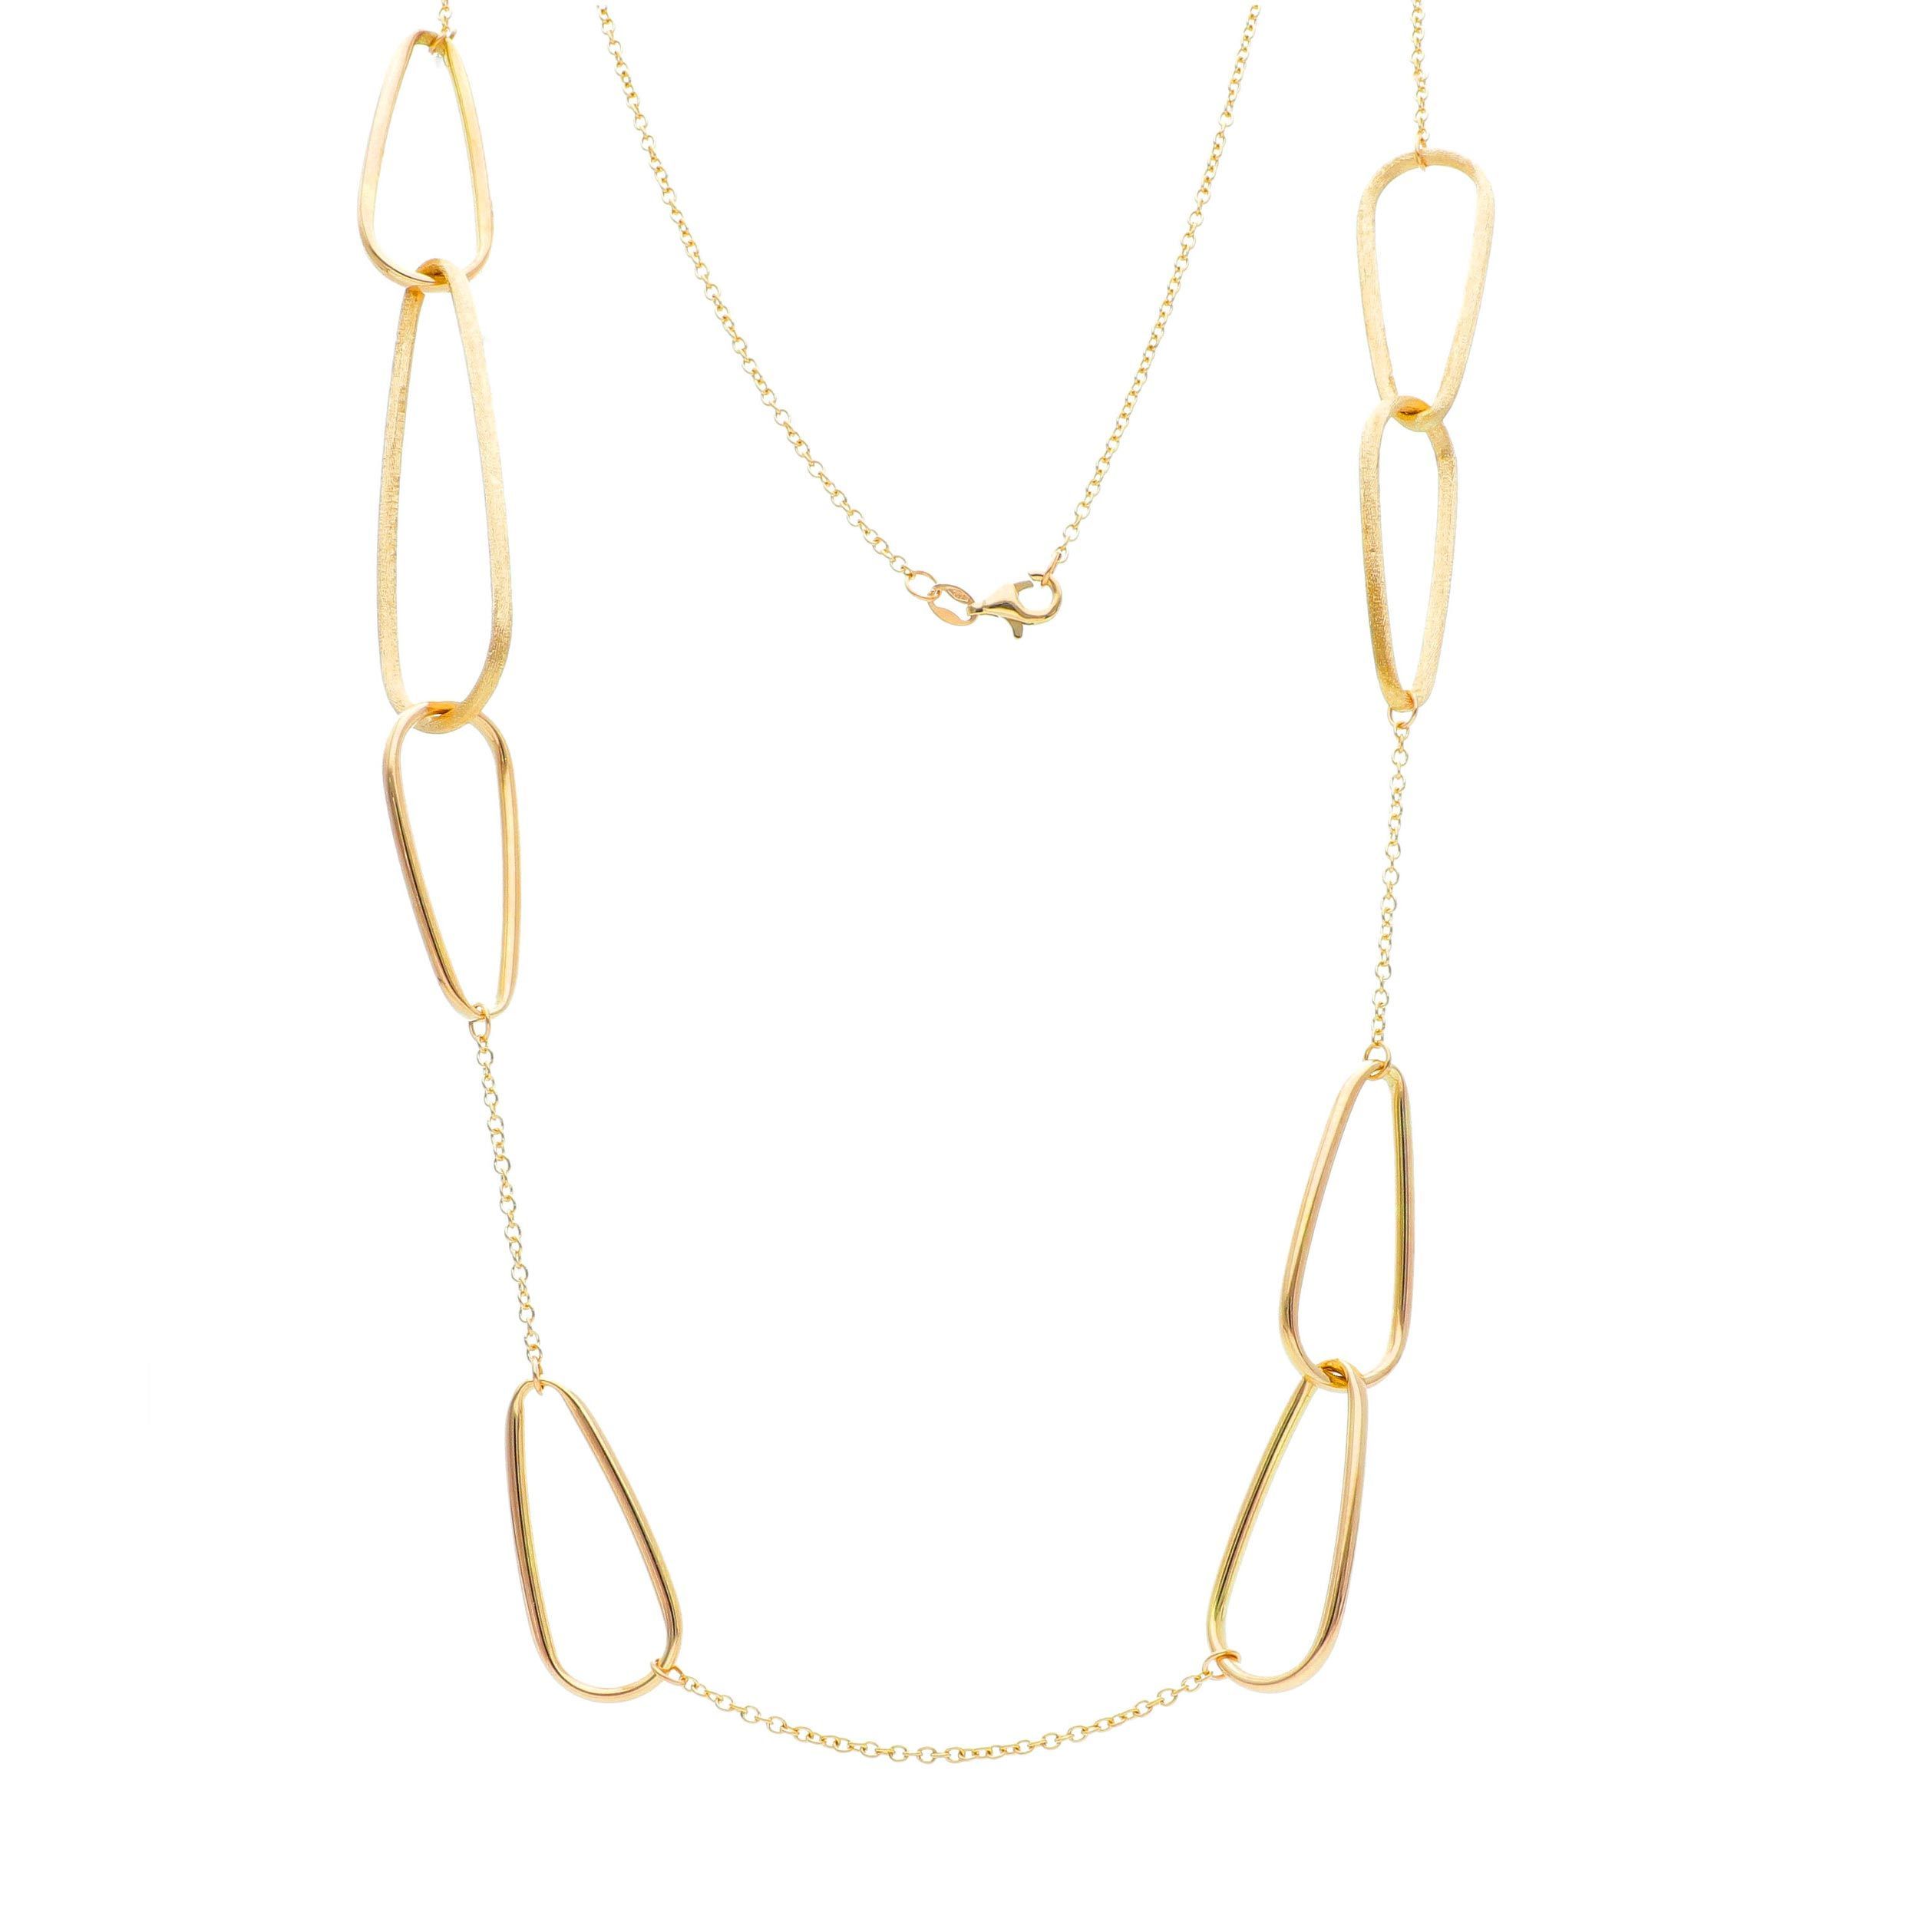 Golden necklace k14 with oval rings (code S246030)